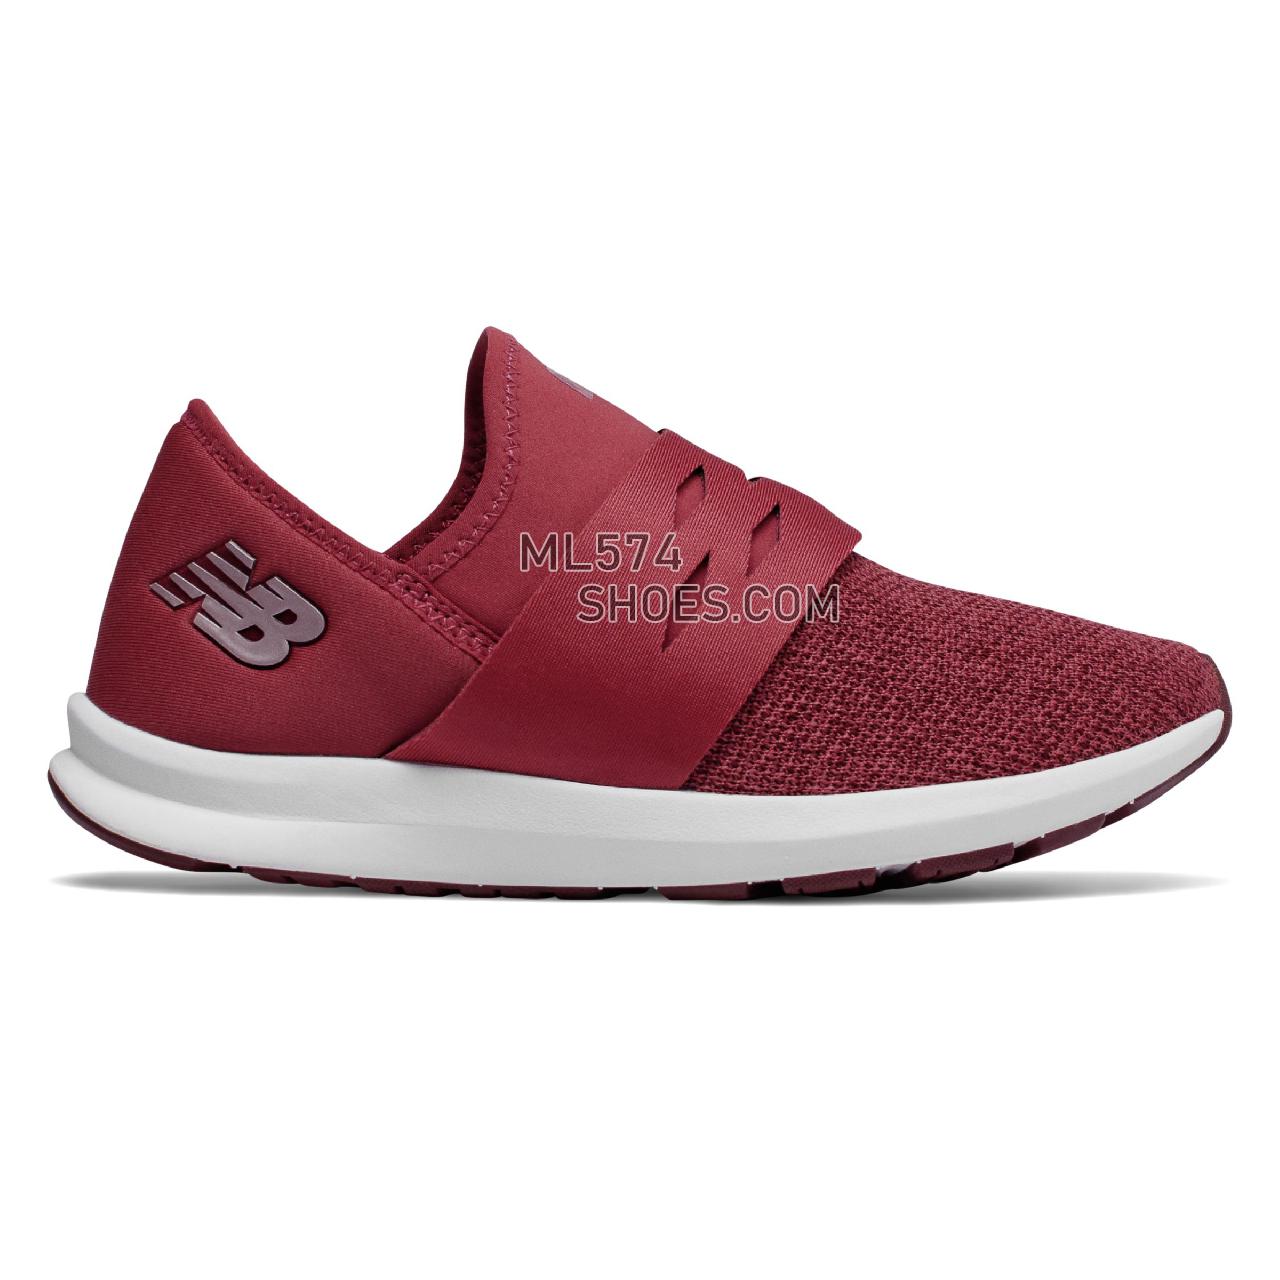 New Balance FuelCore Spark - Women's  - X-training Earth Red with Burgundy - WXSPKRH